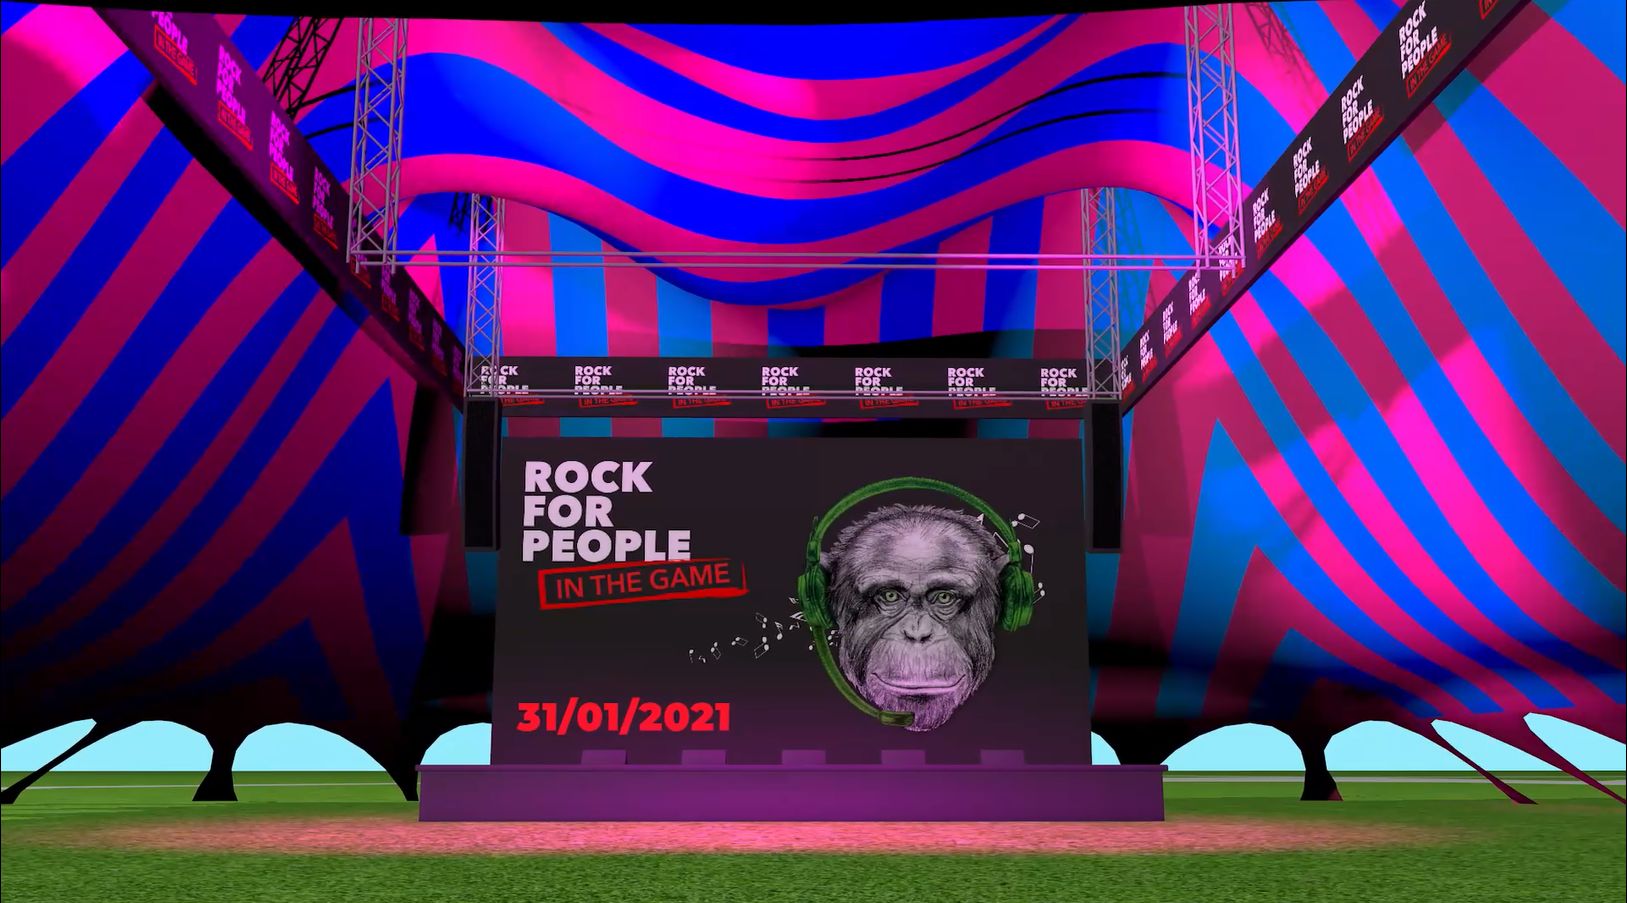 Rock for People In the Game